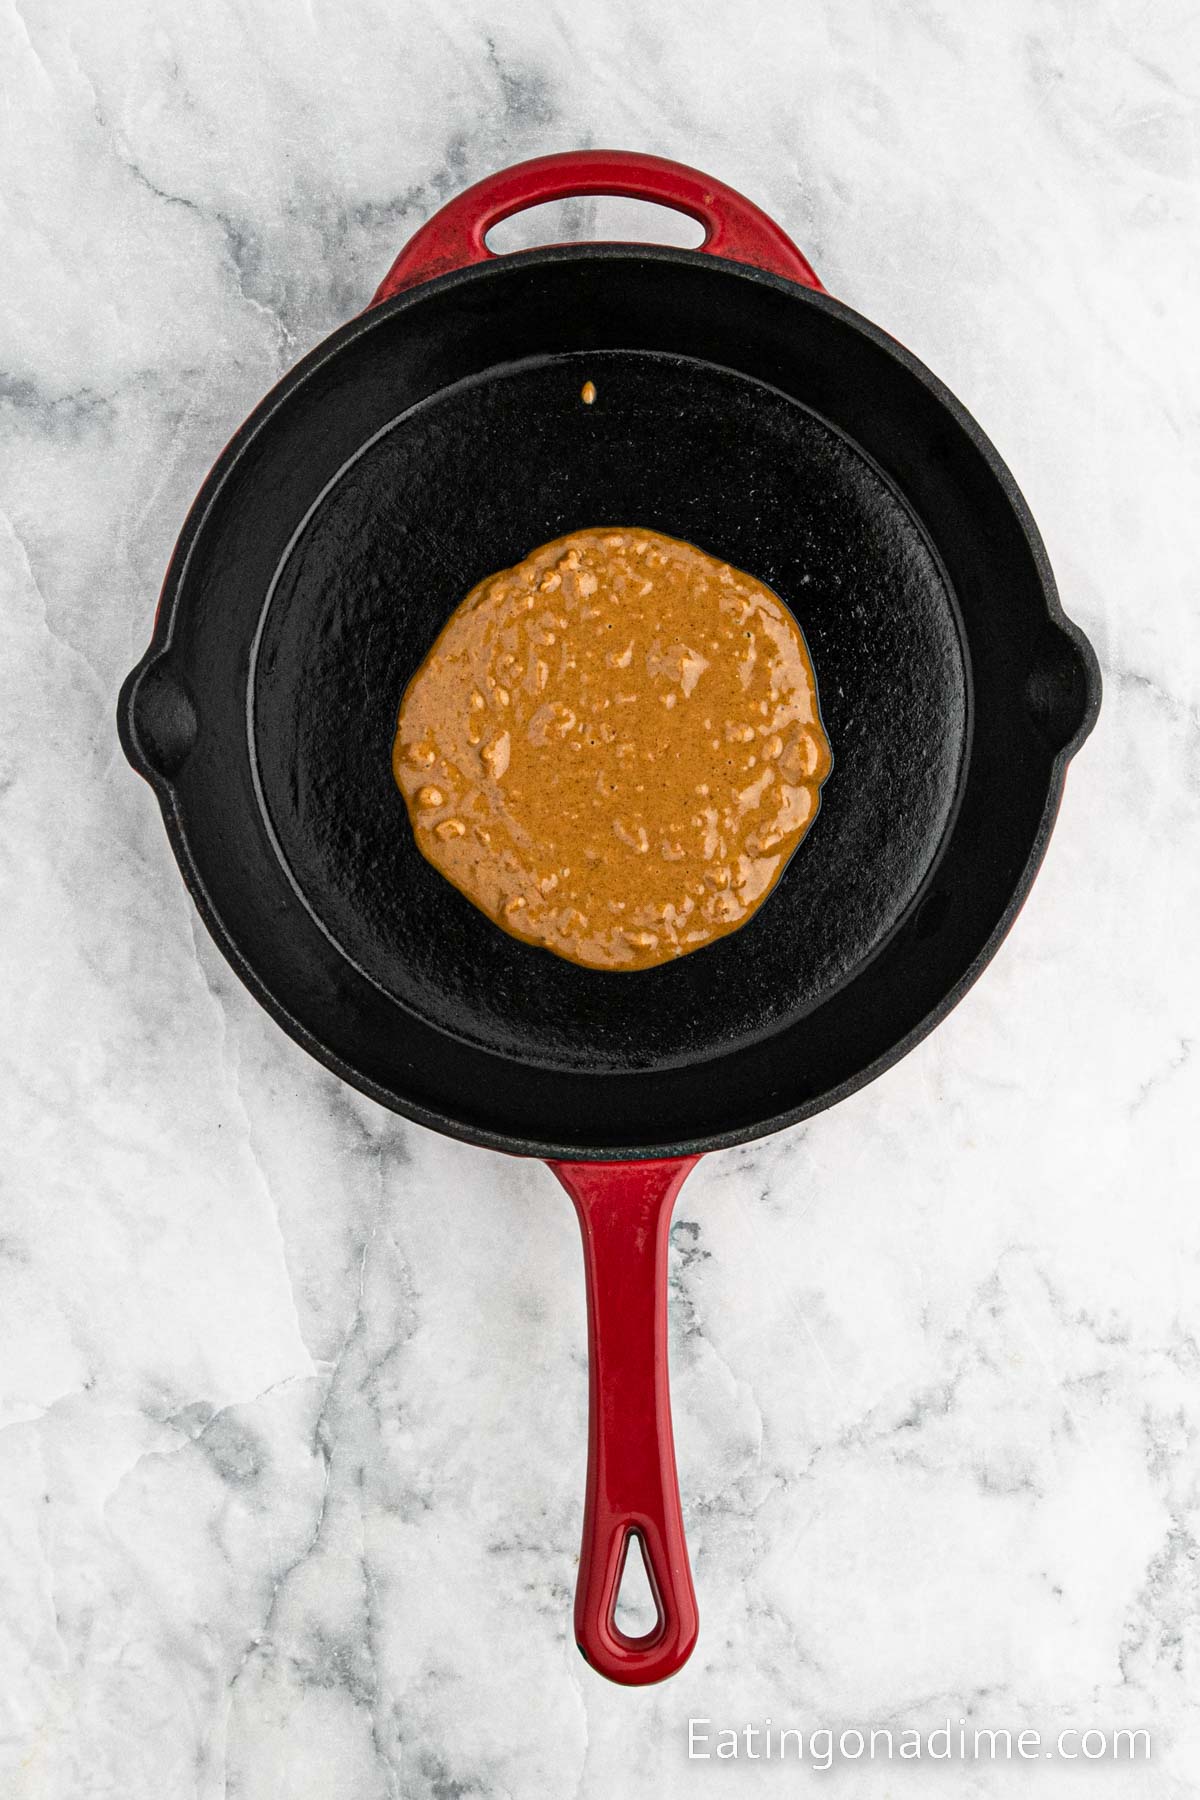 Cooking gingerbread pancake batter in a cast iron skillet